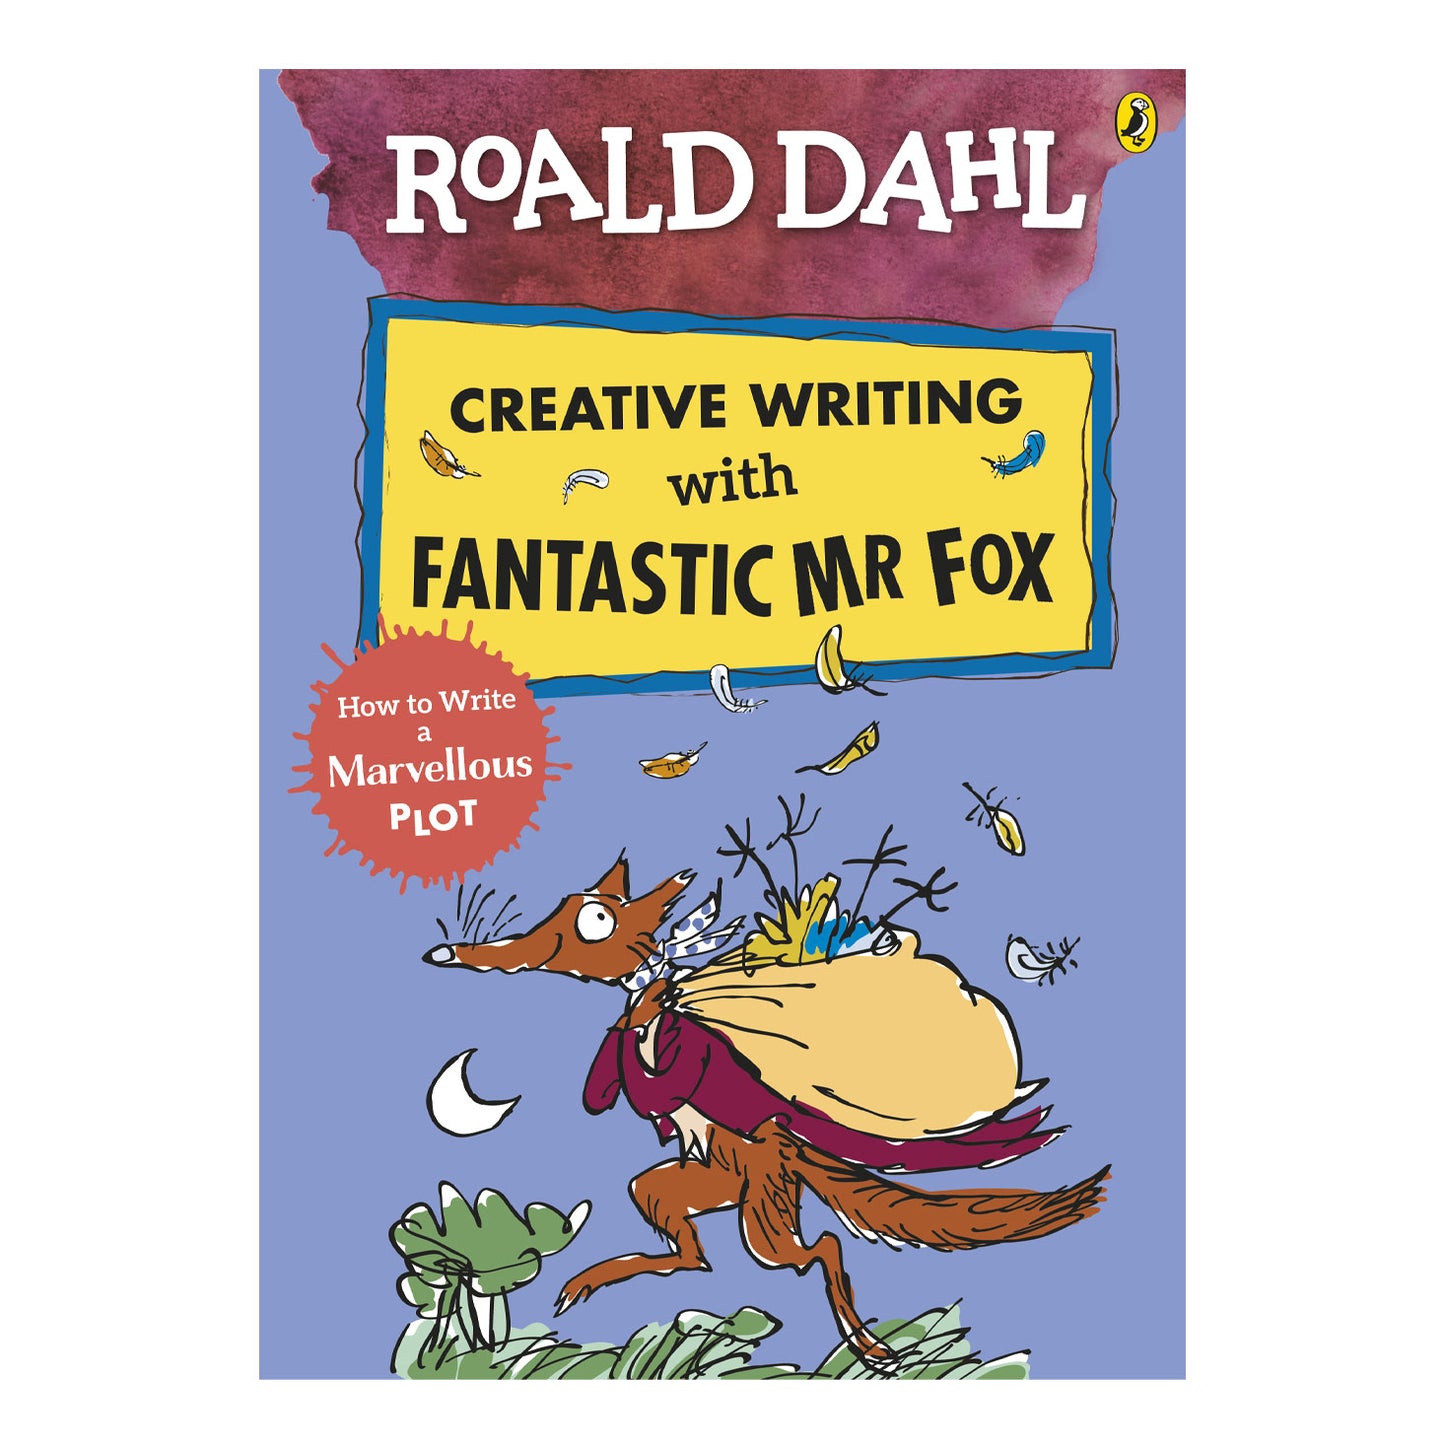 Creative Writing with Fantastic Mr Fox based on Roald Dahl with illustrations by Quentin Blake